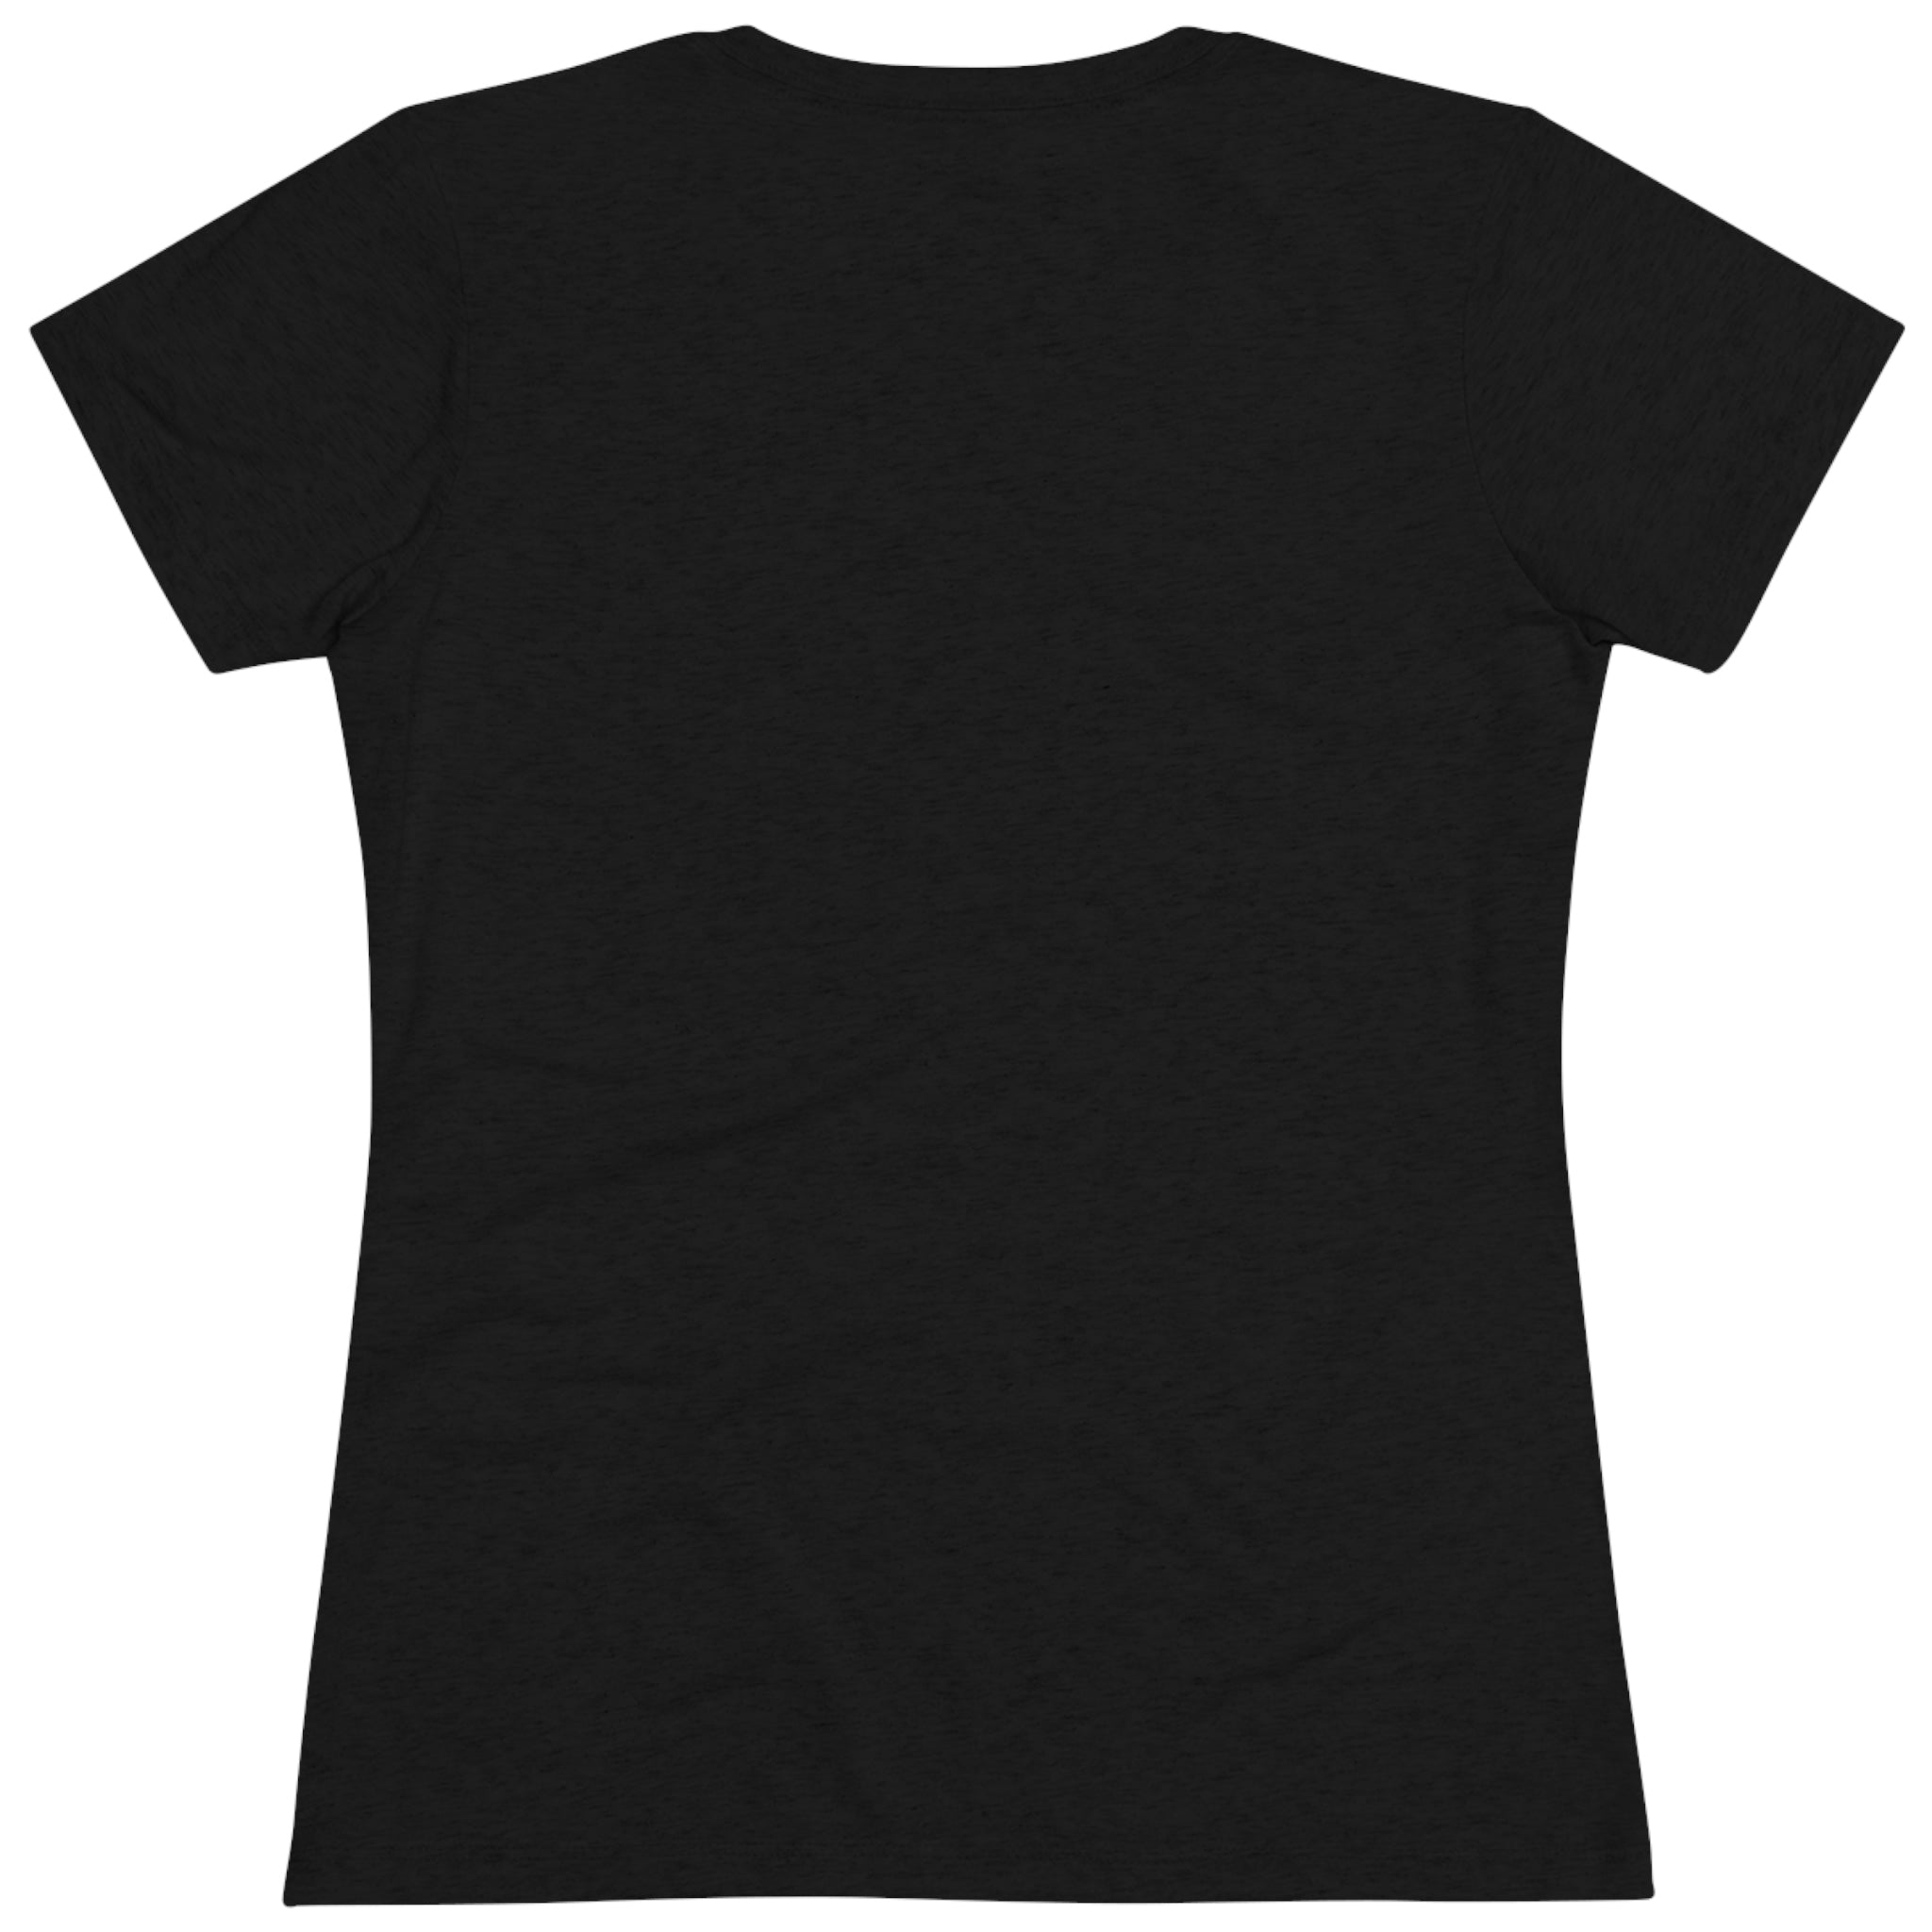 Women's Nothing Is Small Is The Eyes Of God Premium T-Shirt